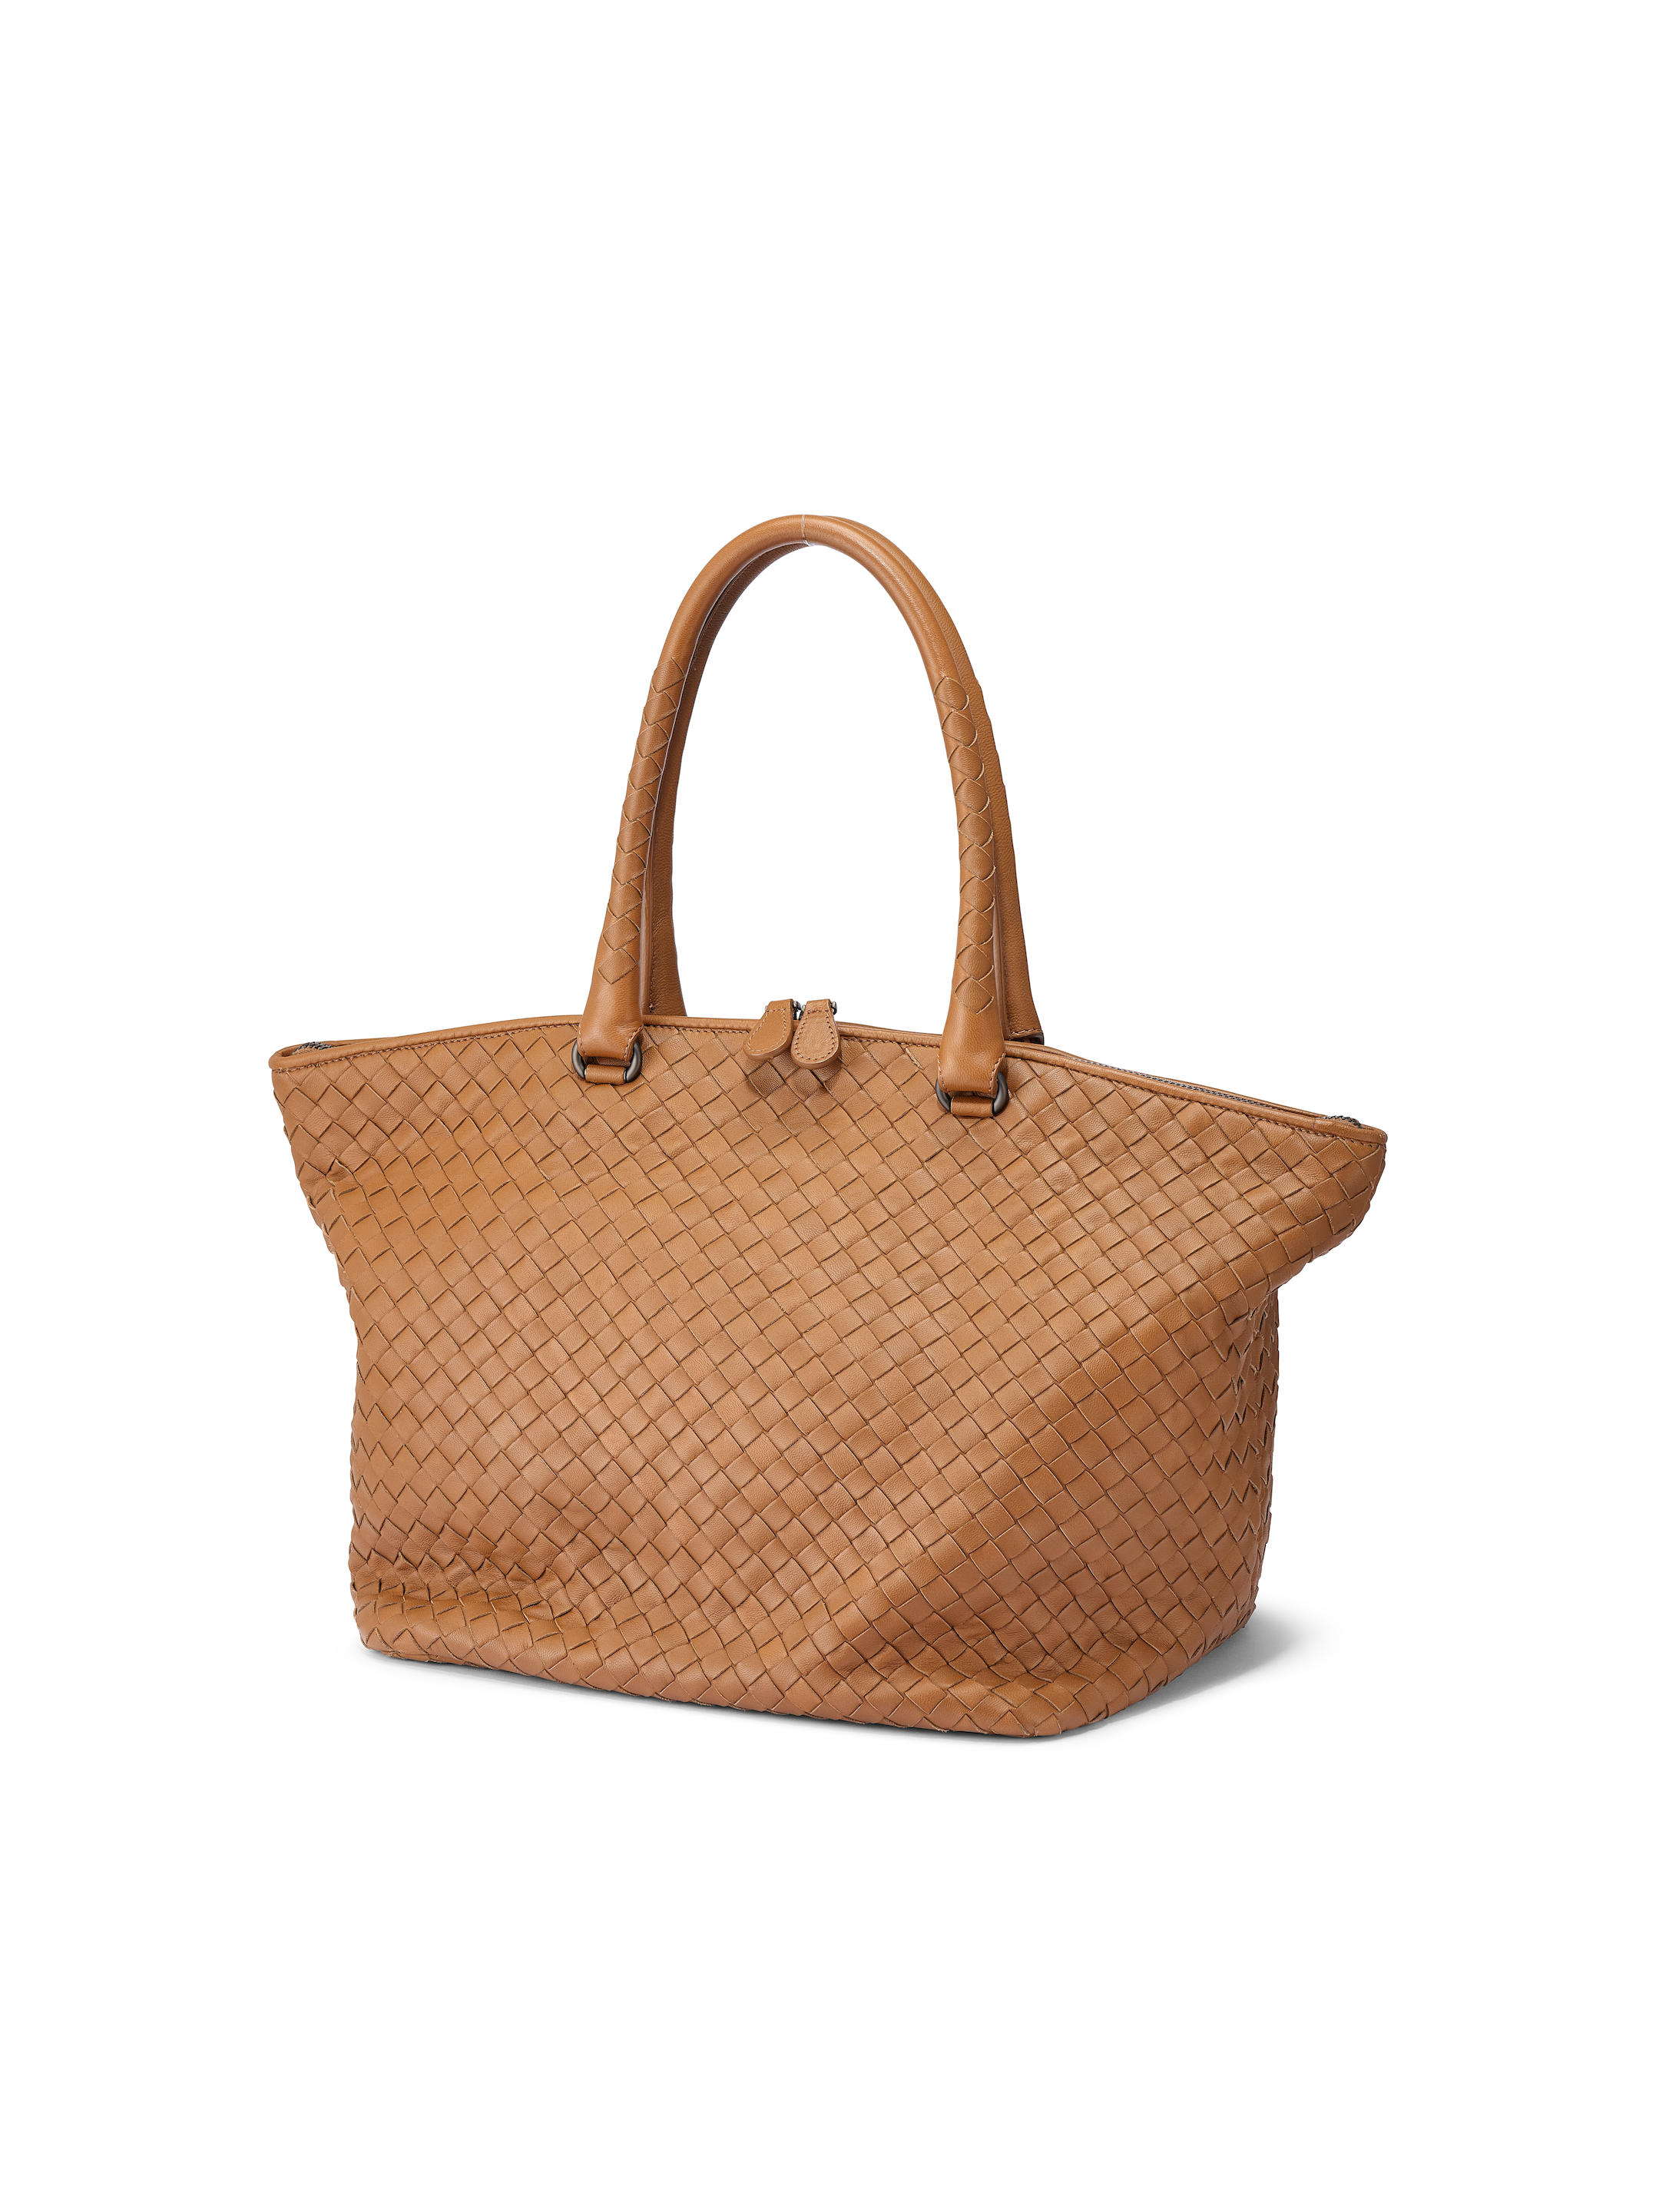 Delvaux Bags for Sale in Online Auctions